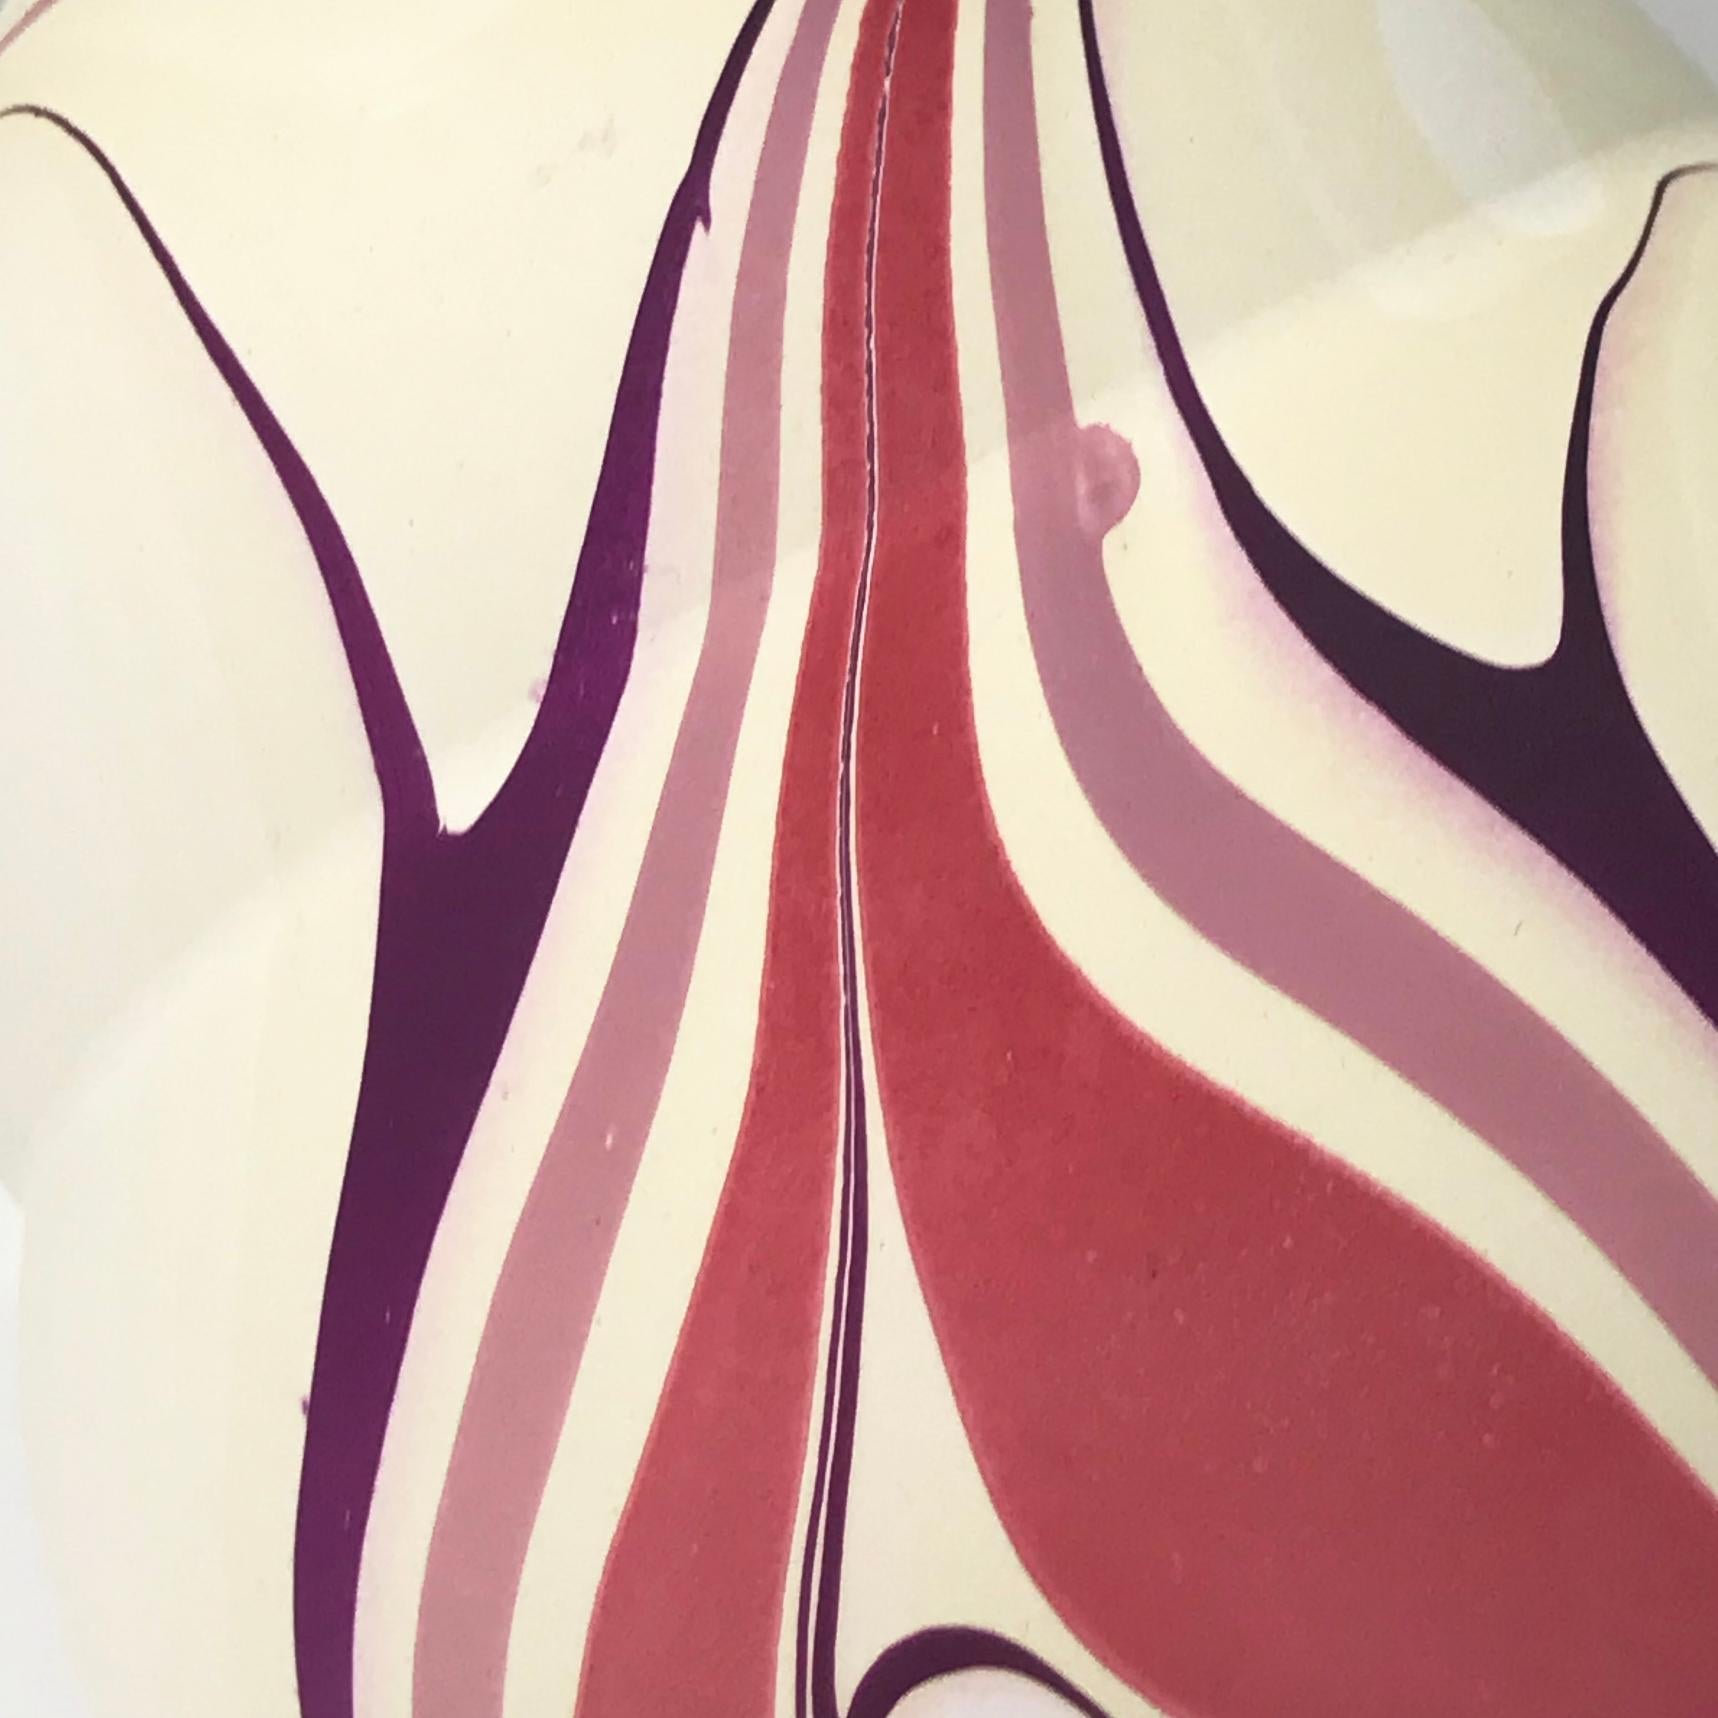 Organic Modern Contemporary Cream and Magenta and Purple Marbled Pandora Vase by Elyse Graham For Sale